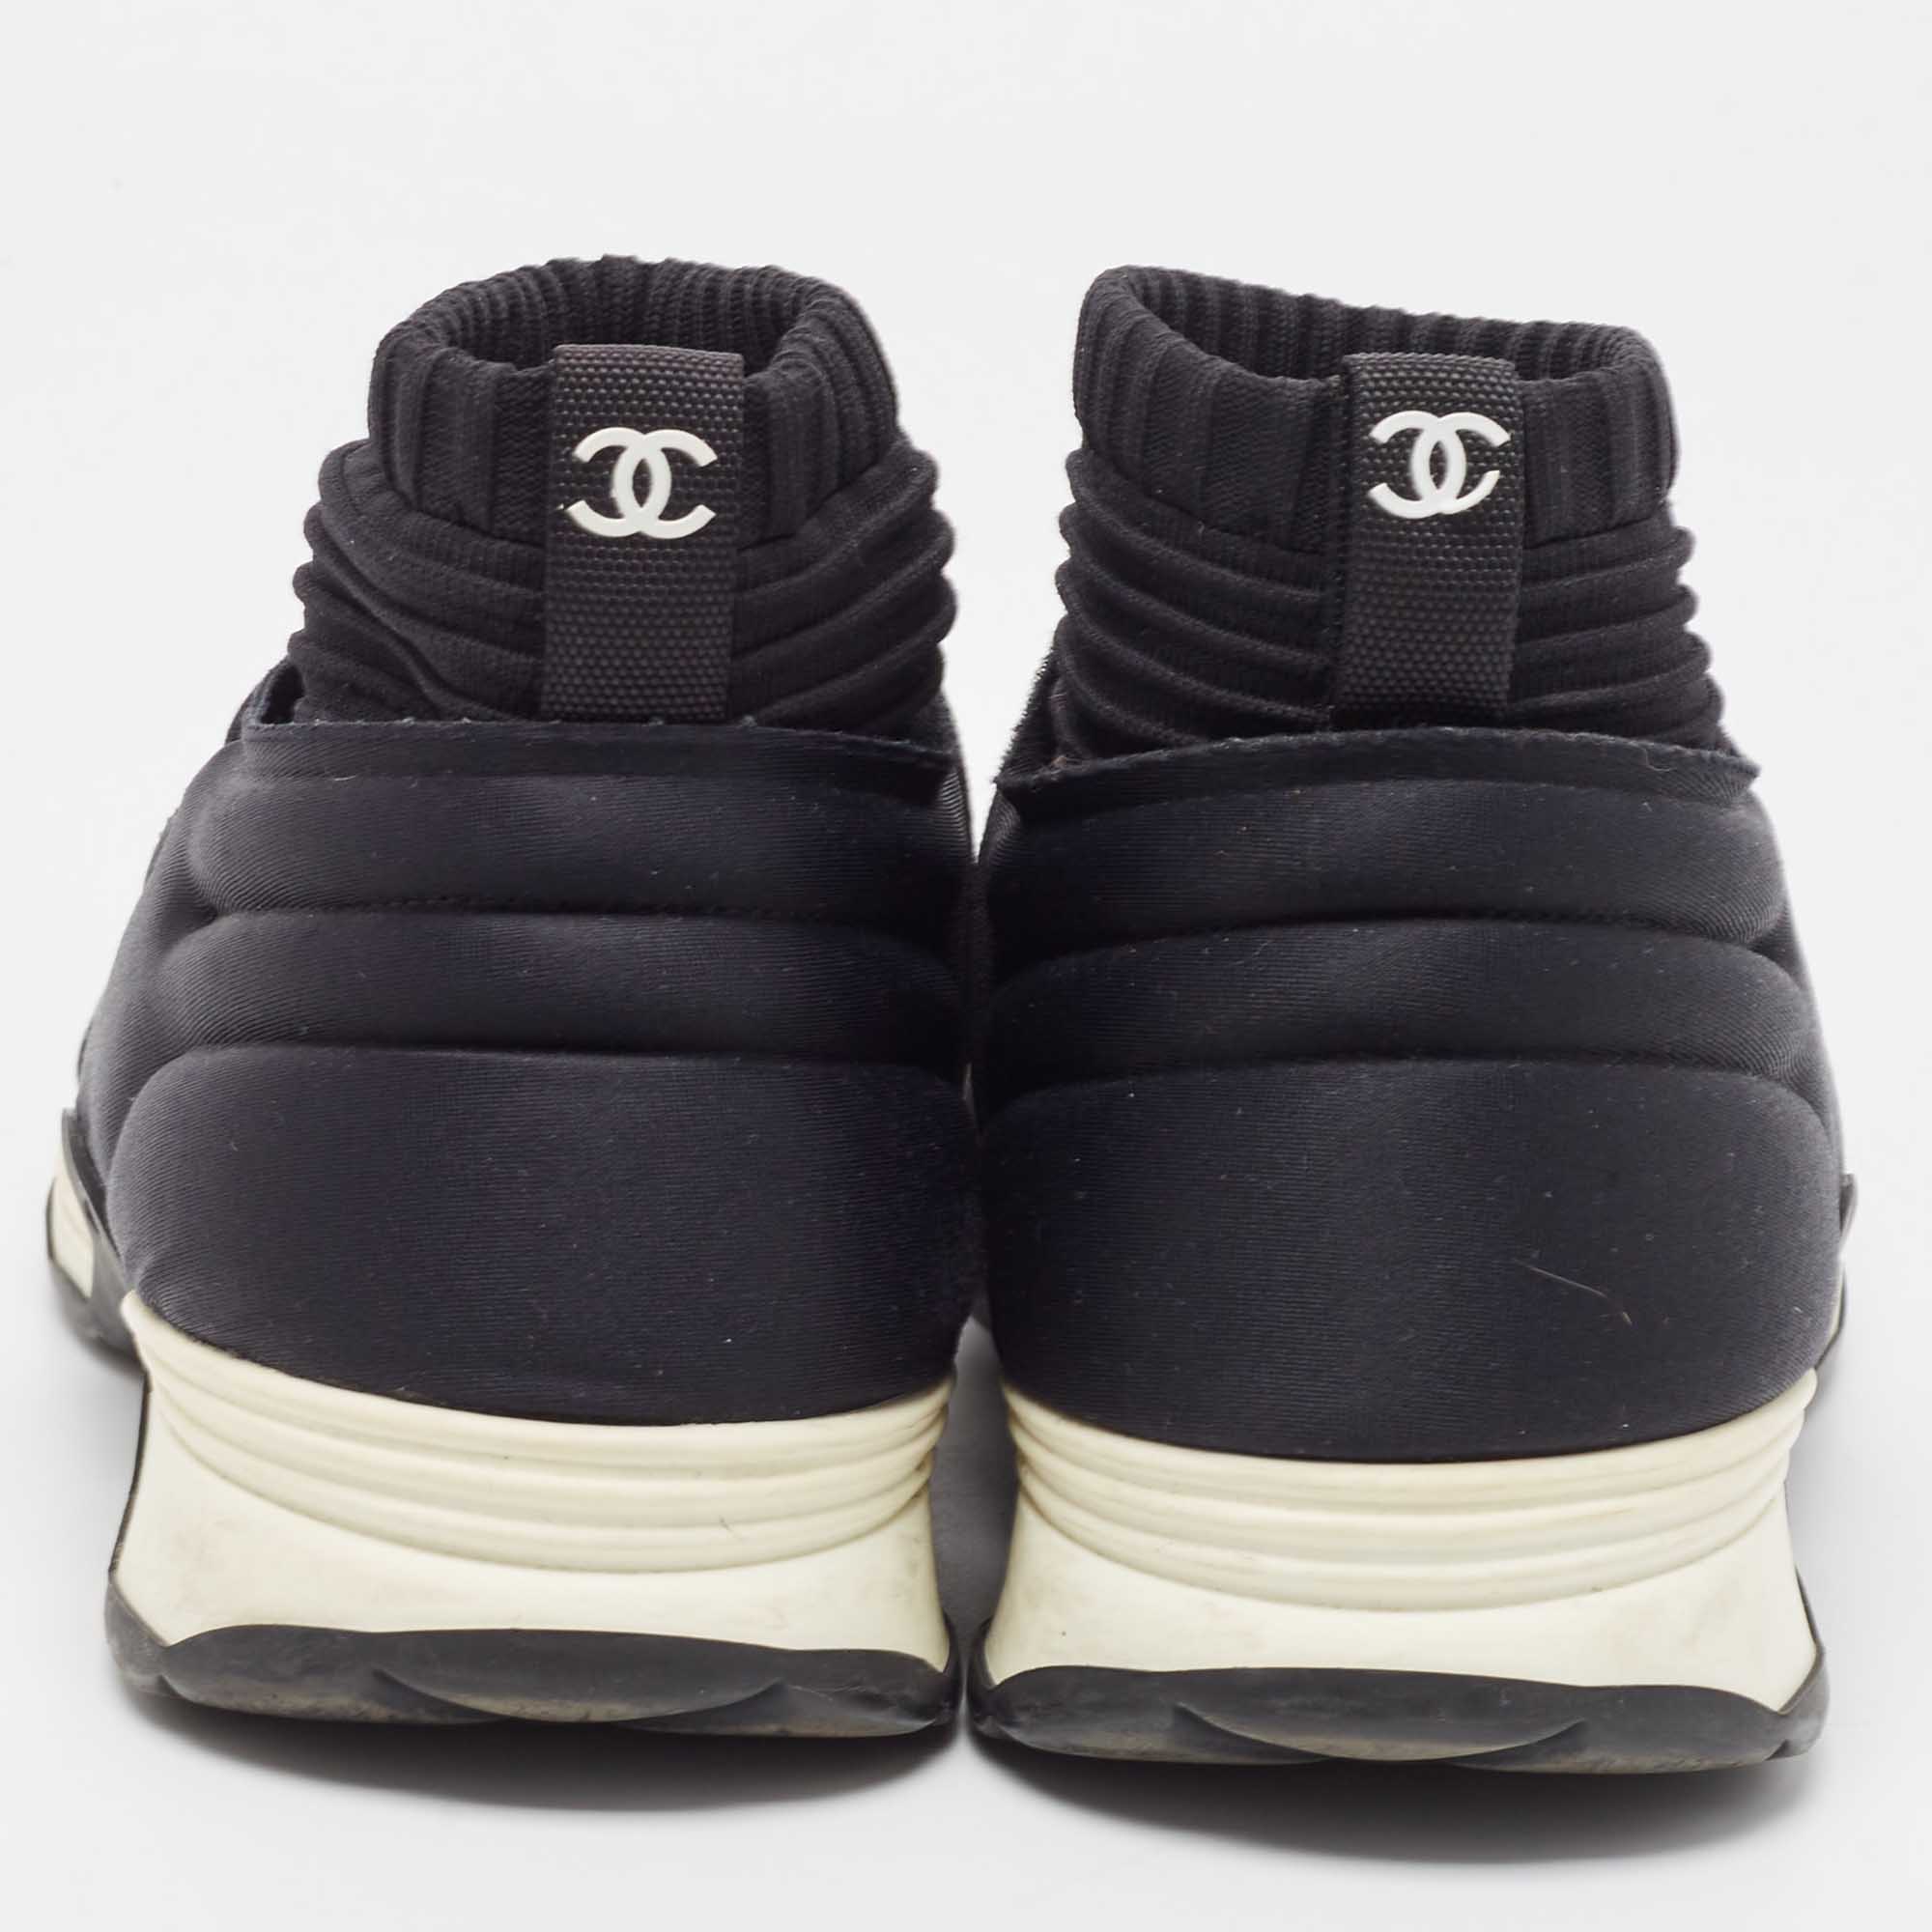 Chanel Black Knit Fabric CC Slip On Sneakers Size 39